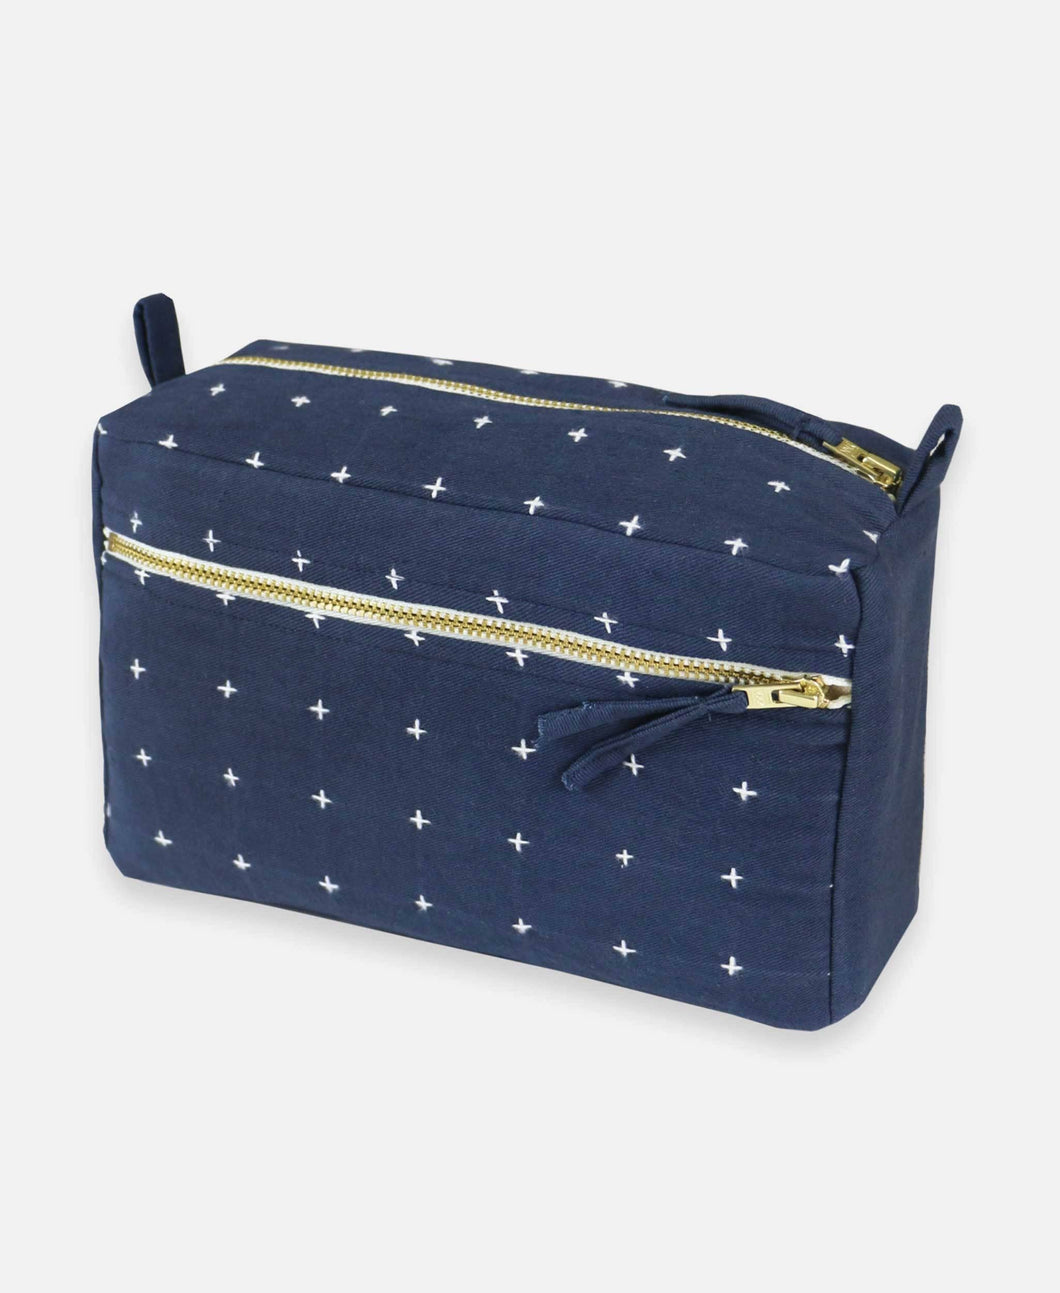 Small Cross-Stitch Toiletry Bag - Navy